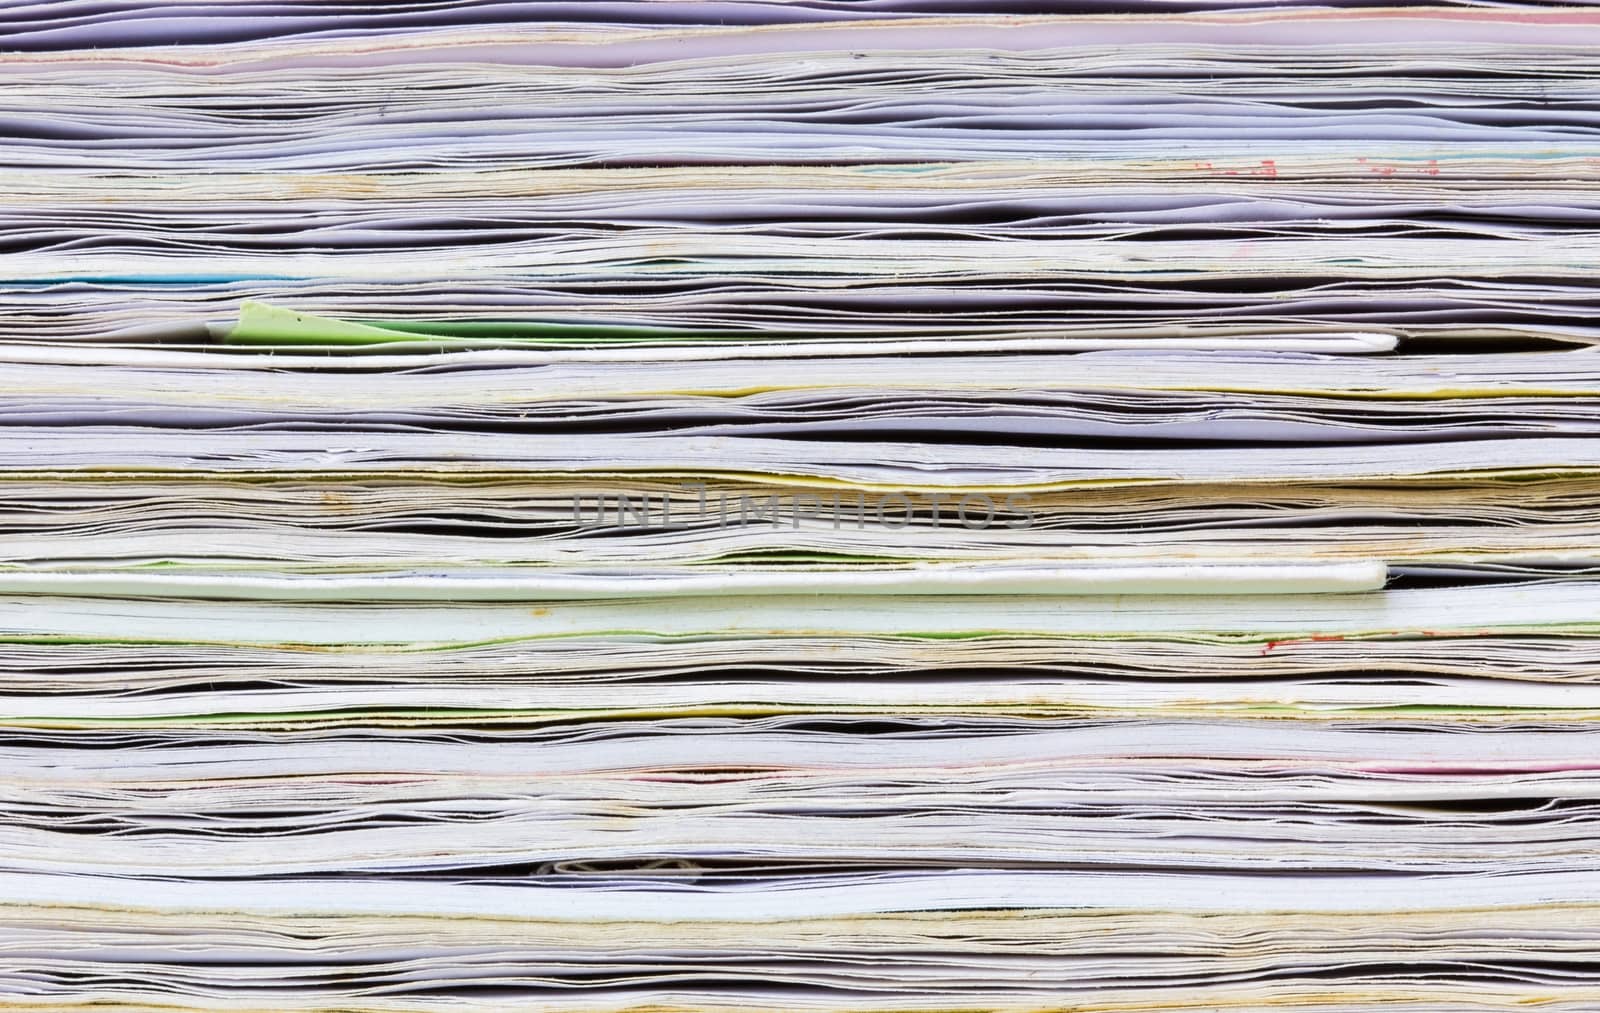 close-up of old colorful notebook spine, background